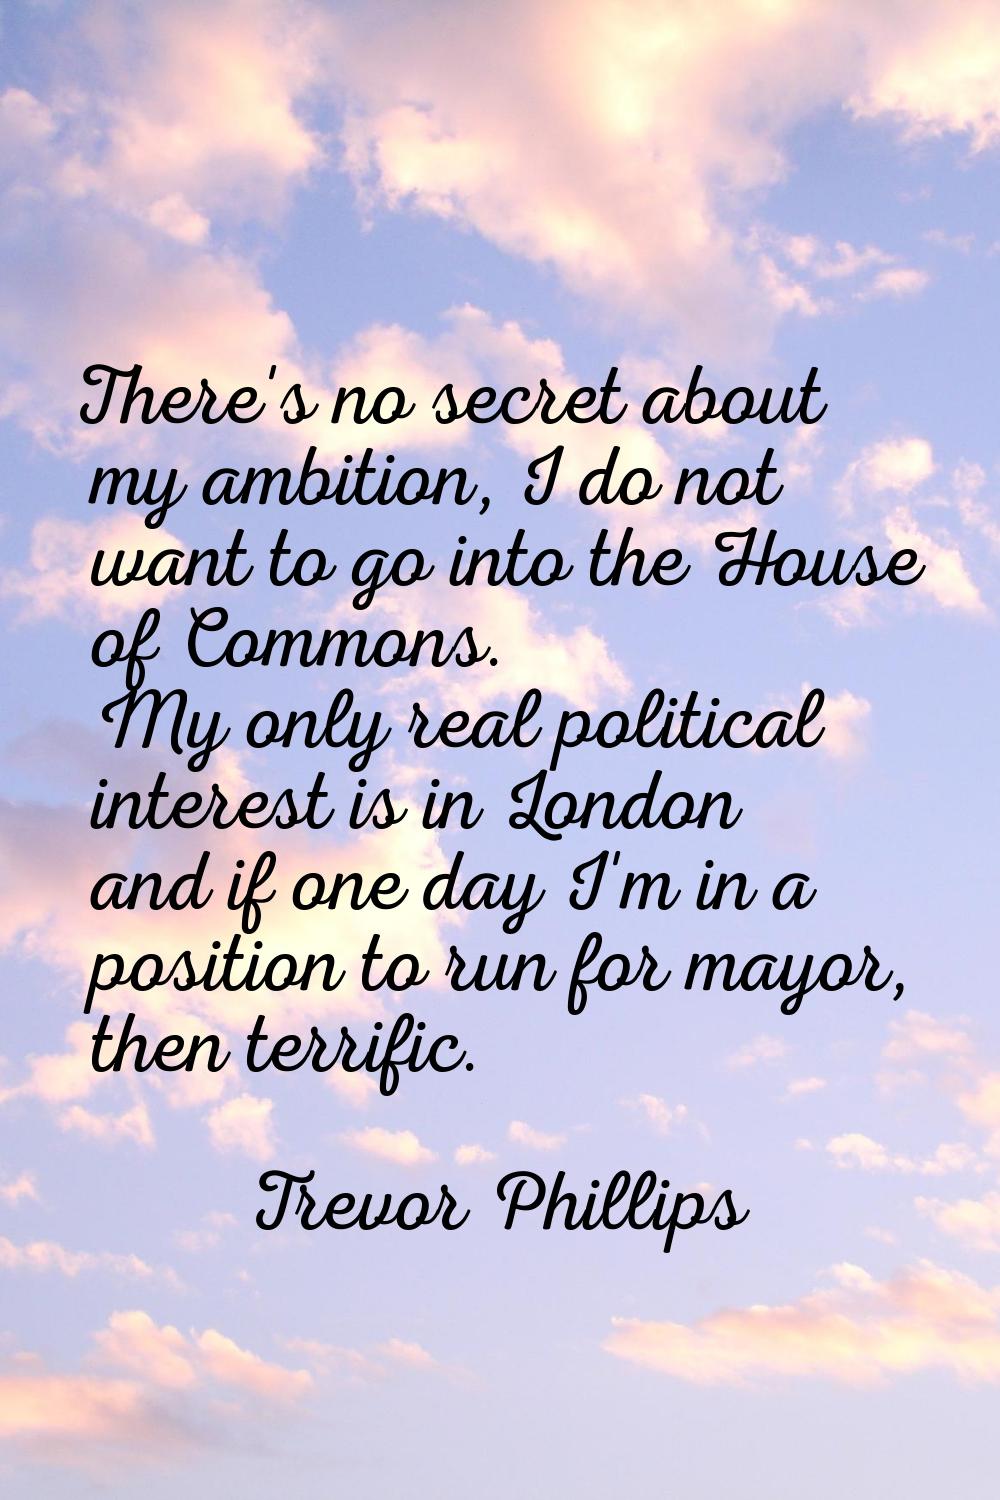 There's no secret about my ambition, I do not want to go into the House of Commons. My only real po